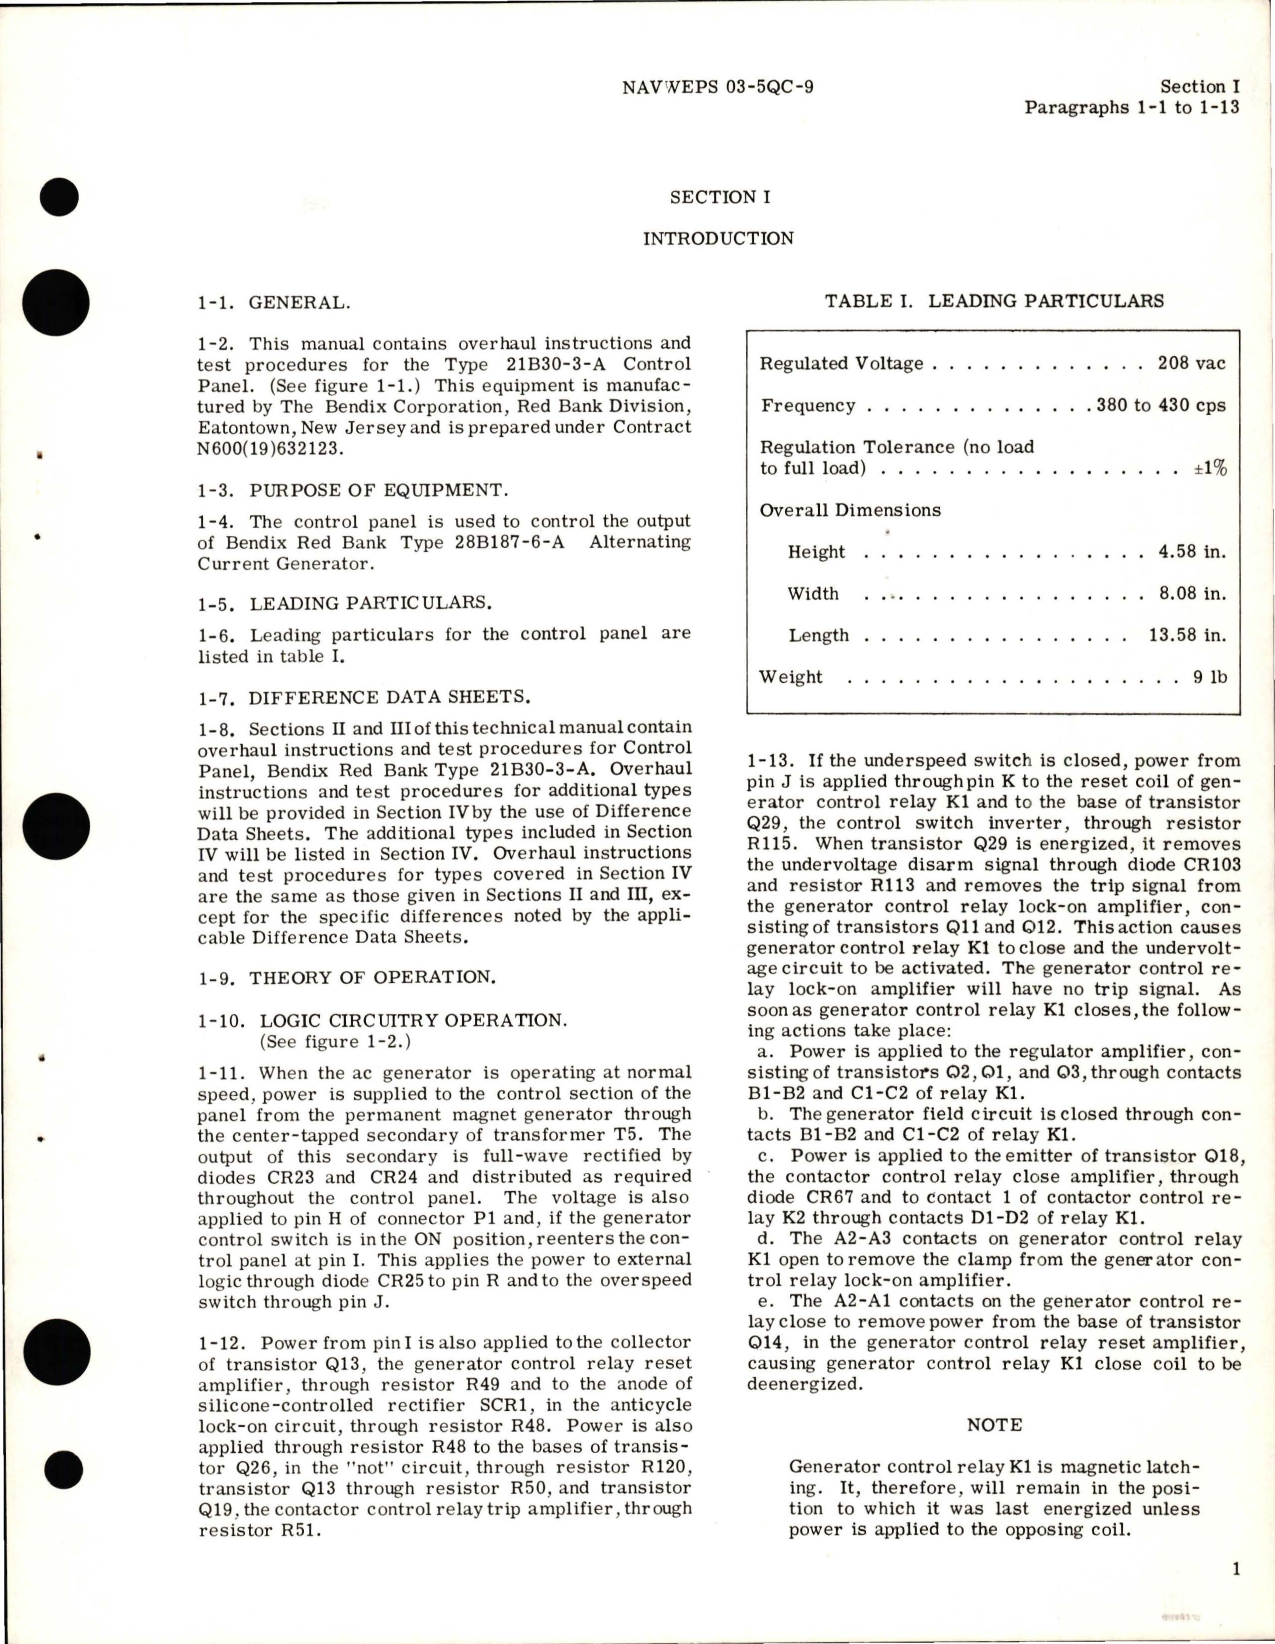 Sample page 5 from AirCorps Library document: Overhaul Instructions for Control Panel - Type 21B30-3-A